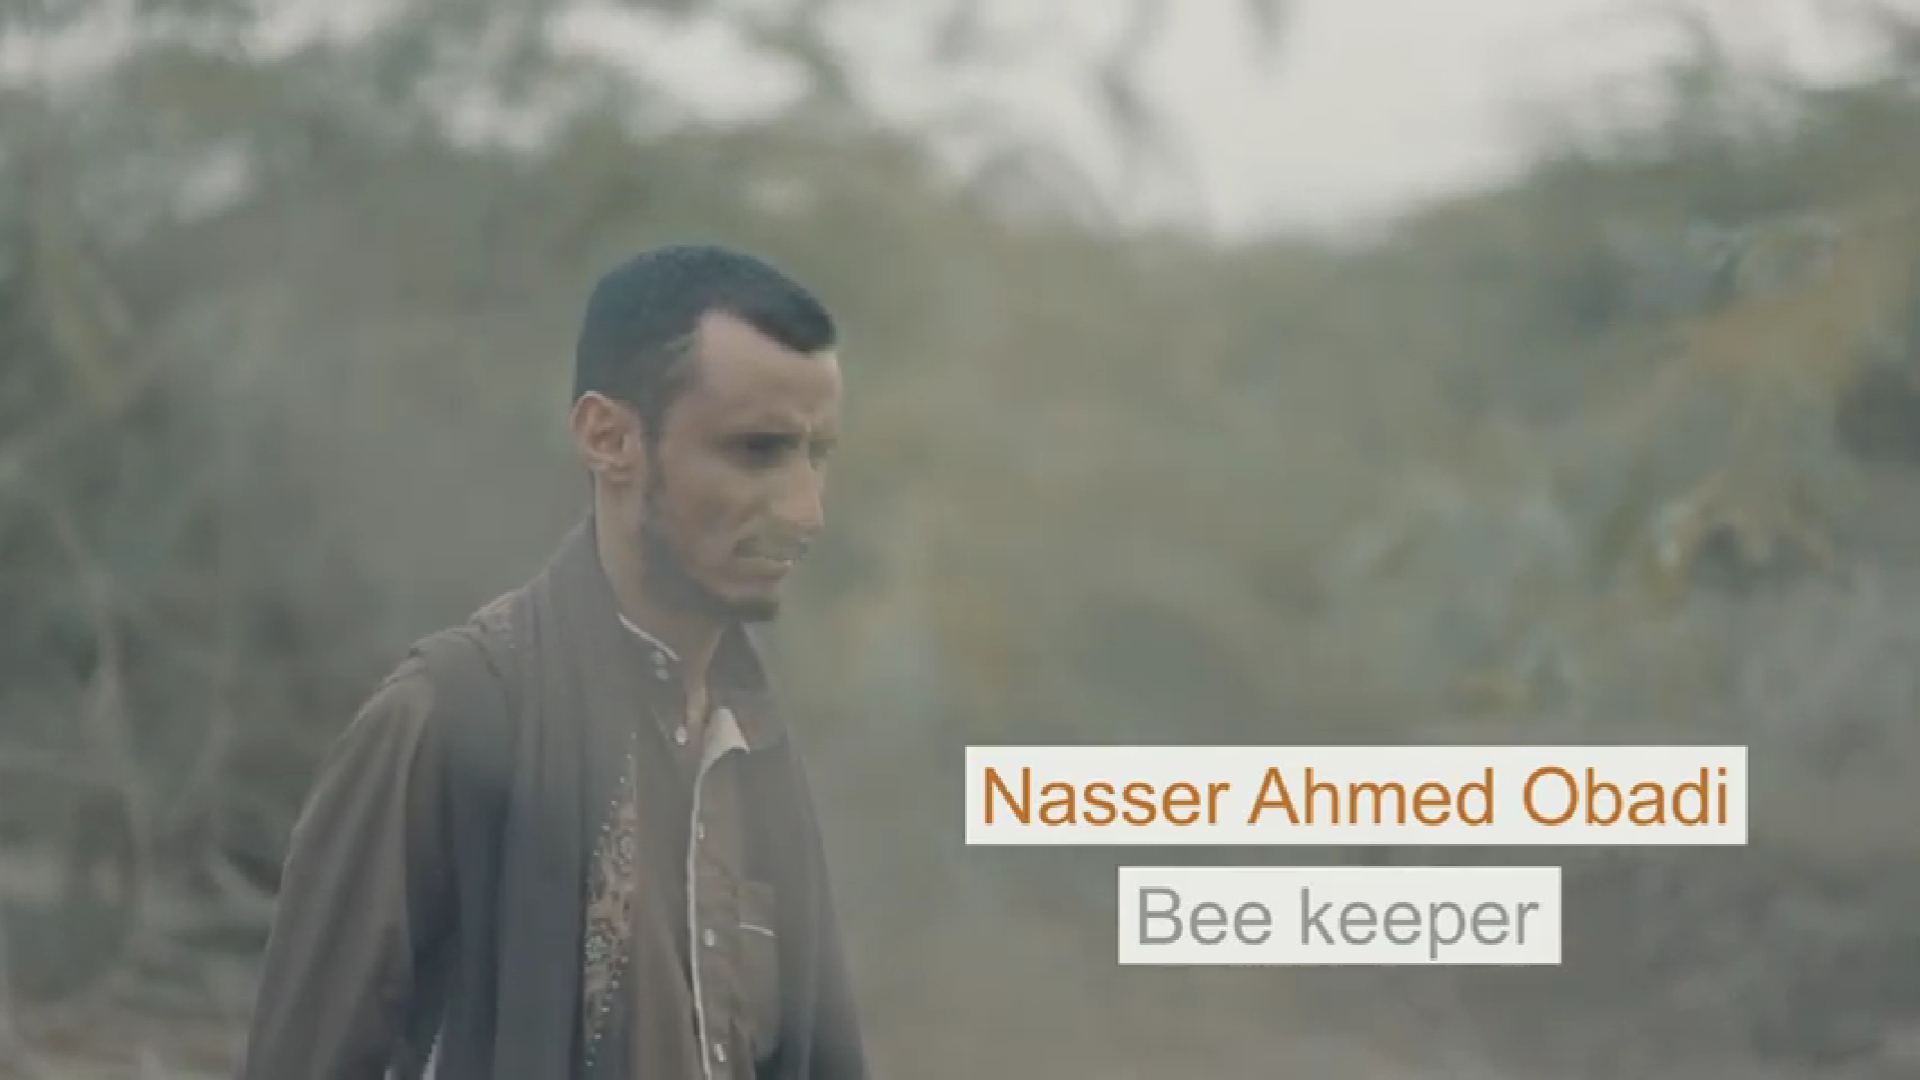 Naser...The Bees' friends